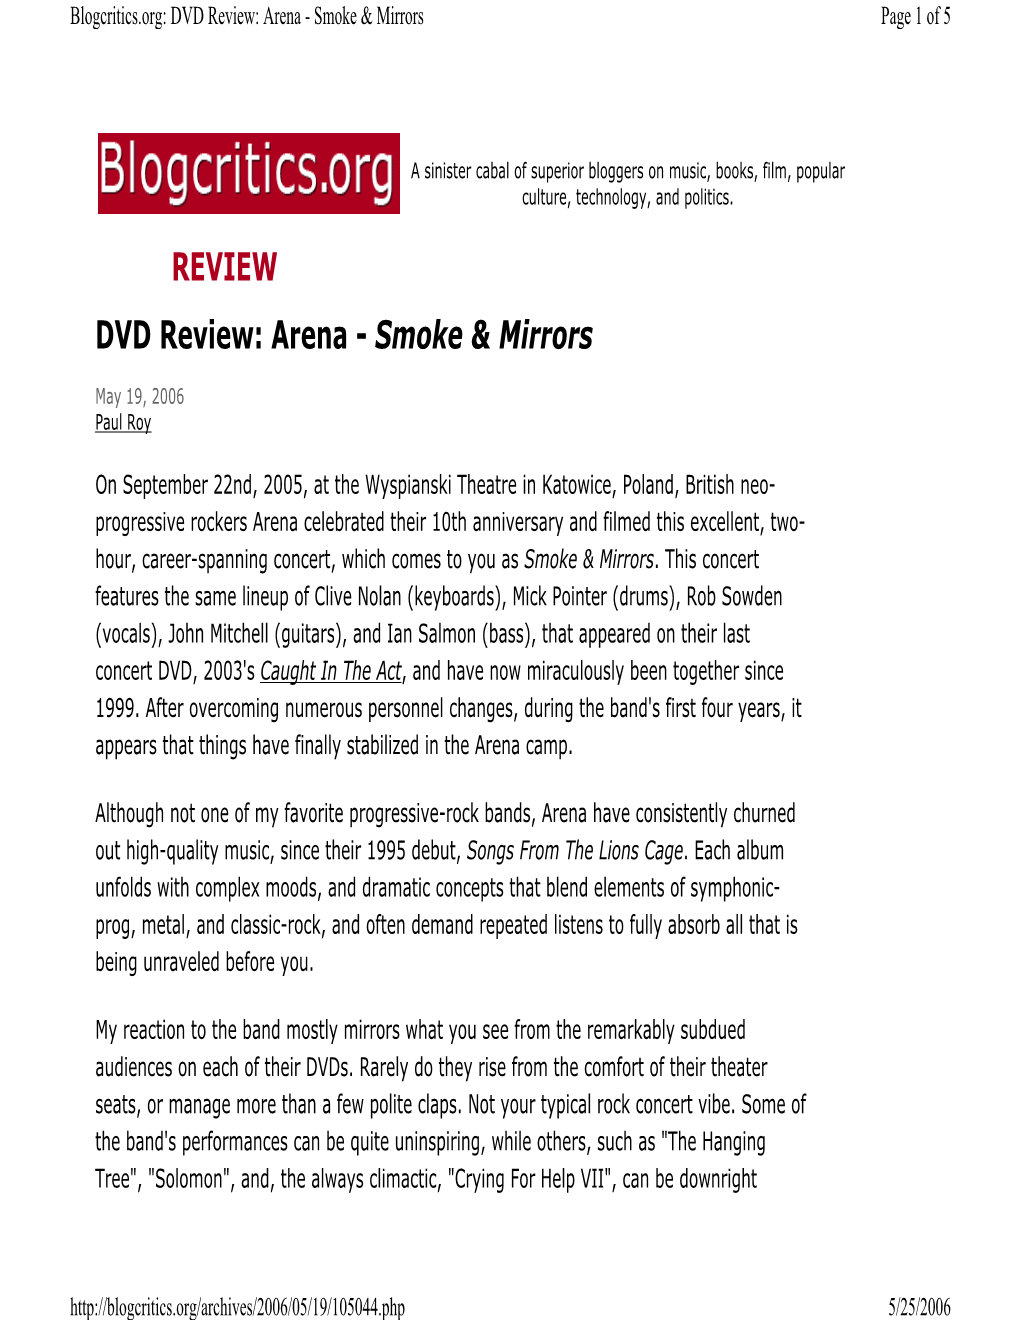 DVD Review: Arena - Smoke & Mirrors Page 1 of 5